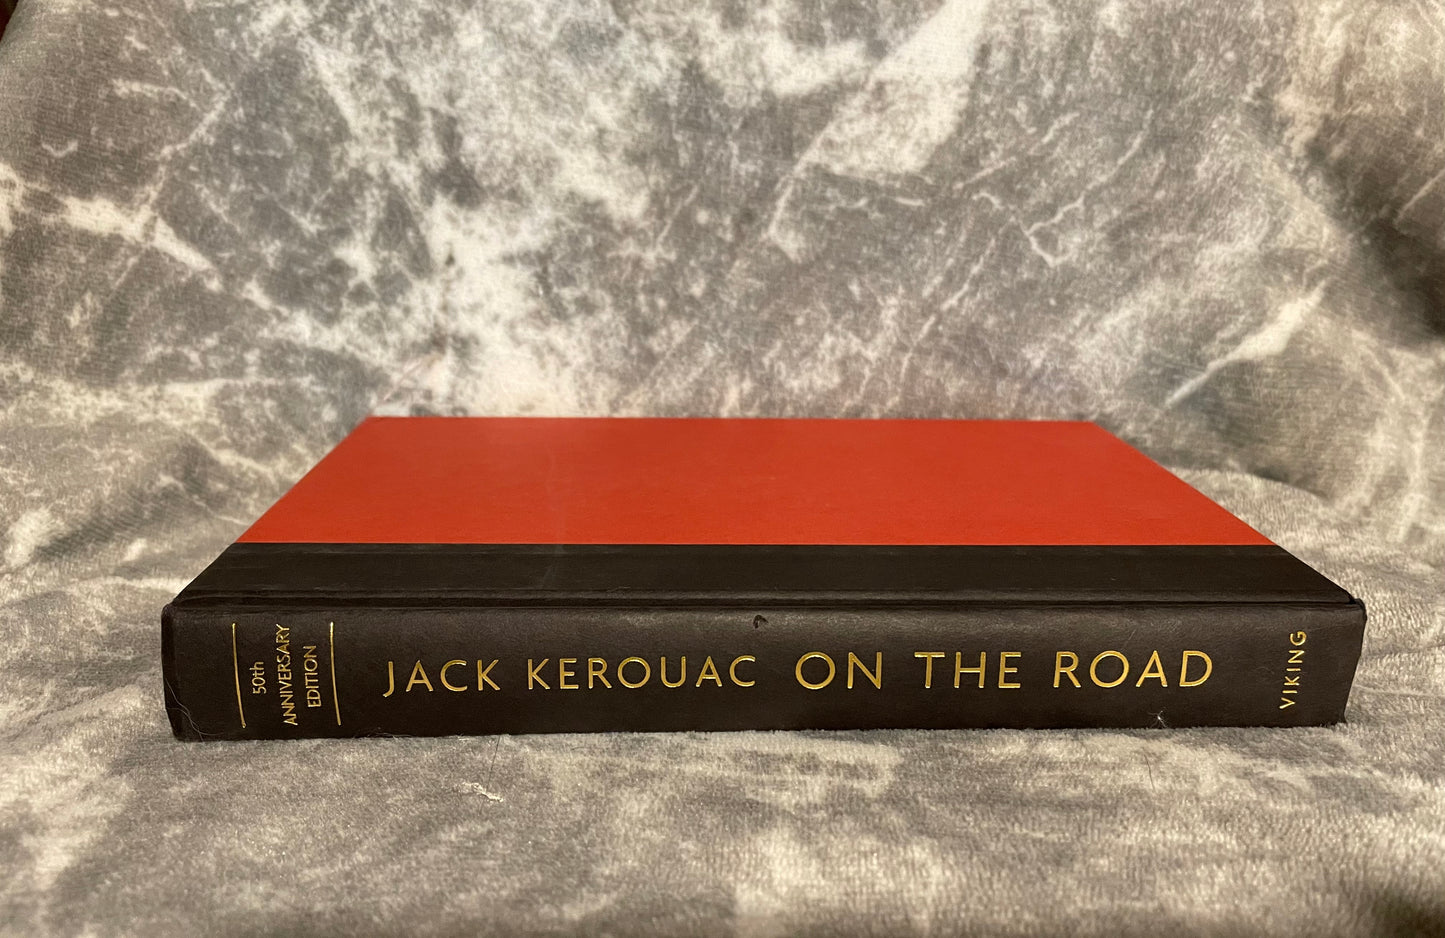 Kerouac, Jack: On the Road (50th Anniversary Edition, 2007 - 2nd printing)